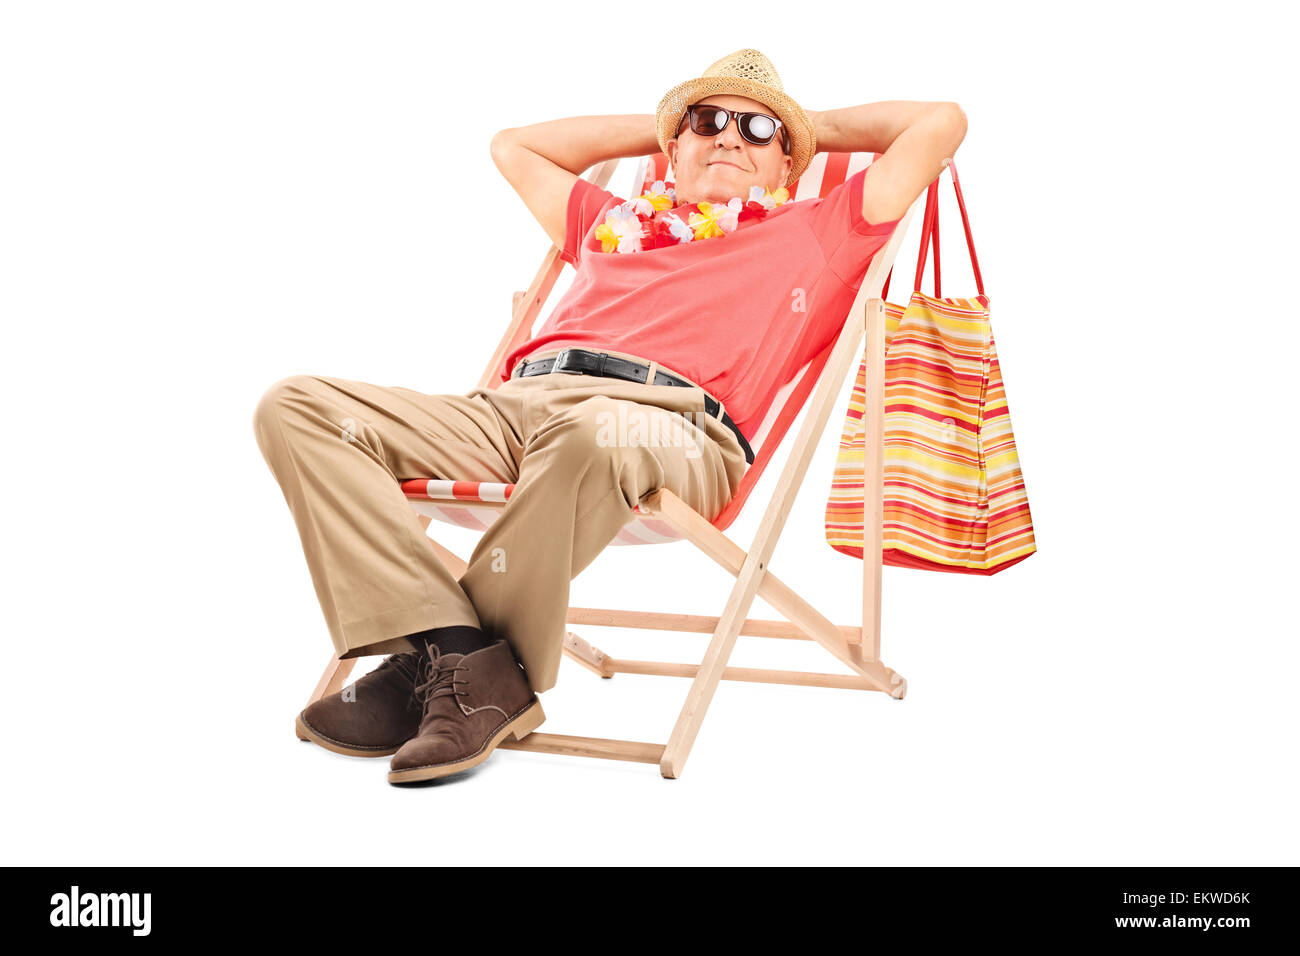 Relaxed senior gentleman with sunglasses sitting in a comfortable sun lounger chair isolated on white background Stock Photo